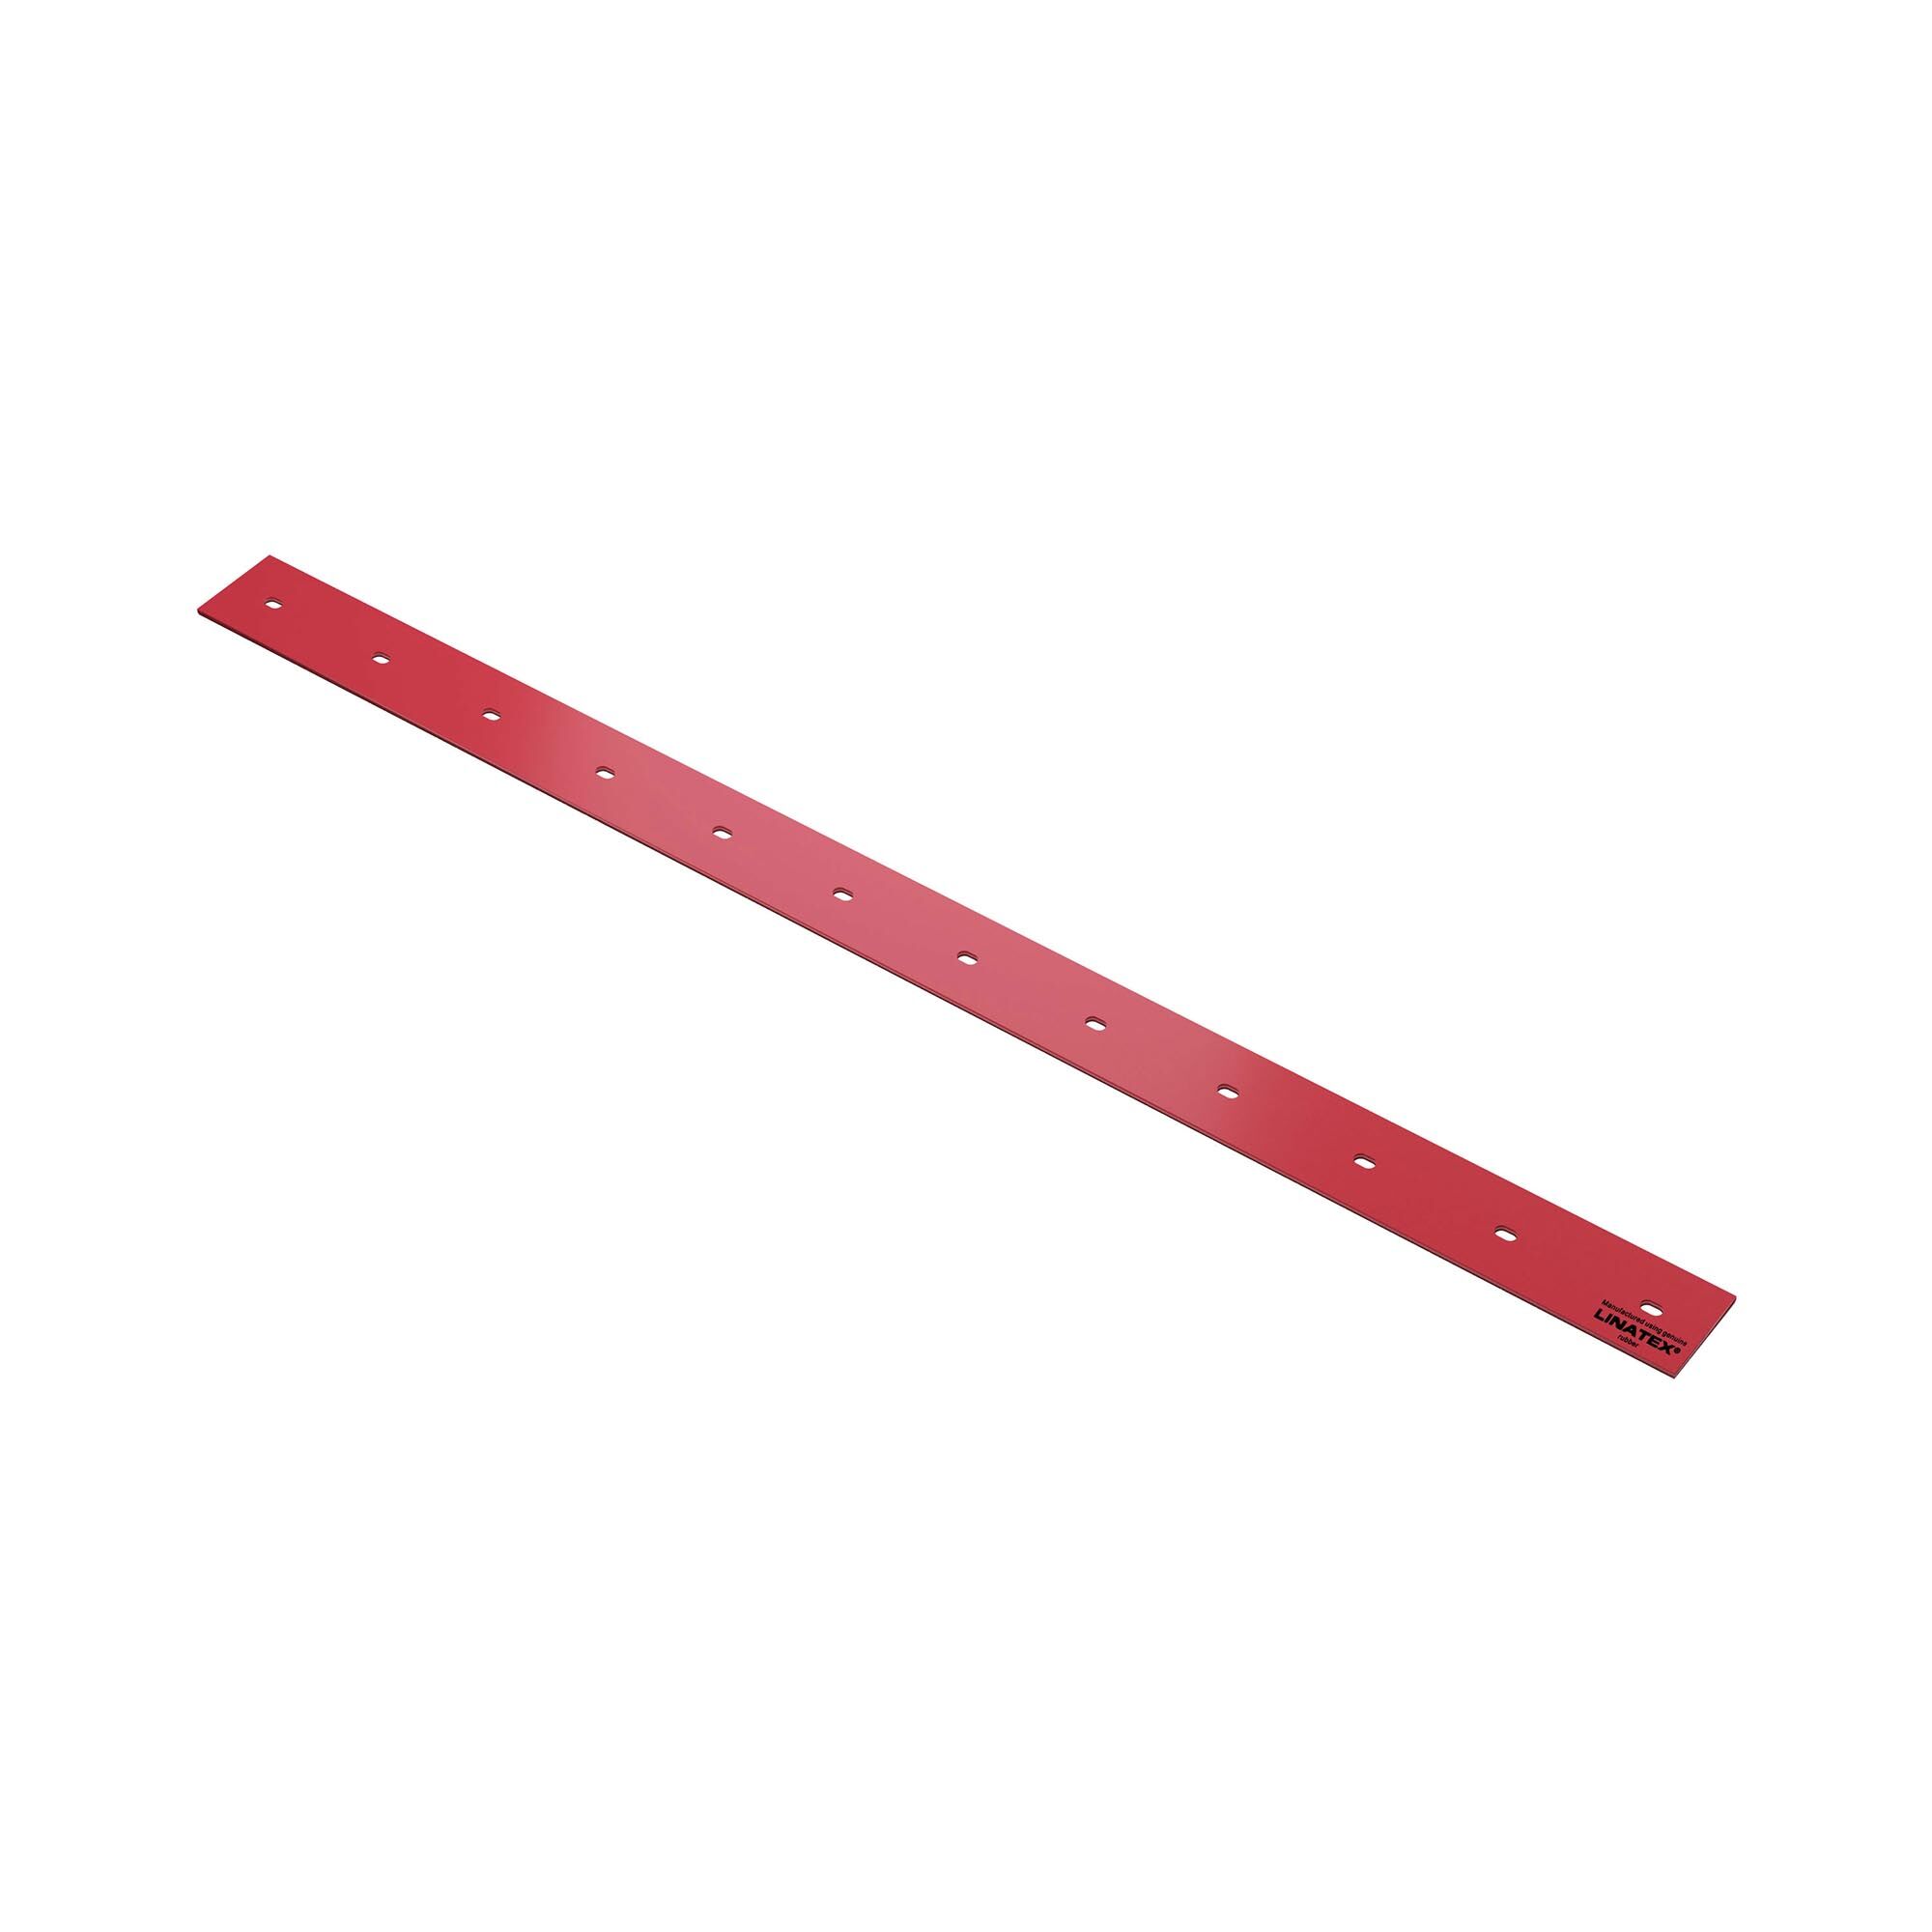 ulsonix Rubber Rear Squeegee for TOPCLEAN 950 and TOPCLEAN 1600